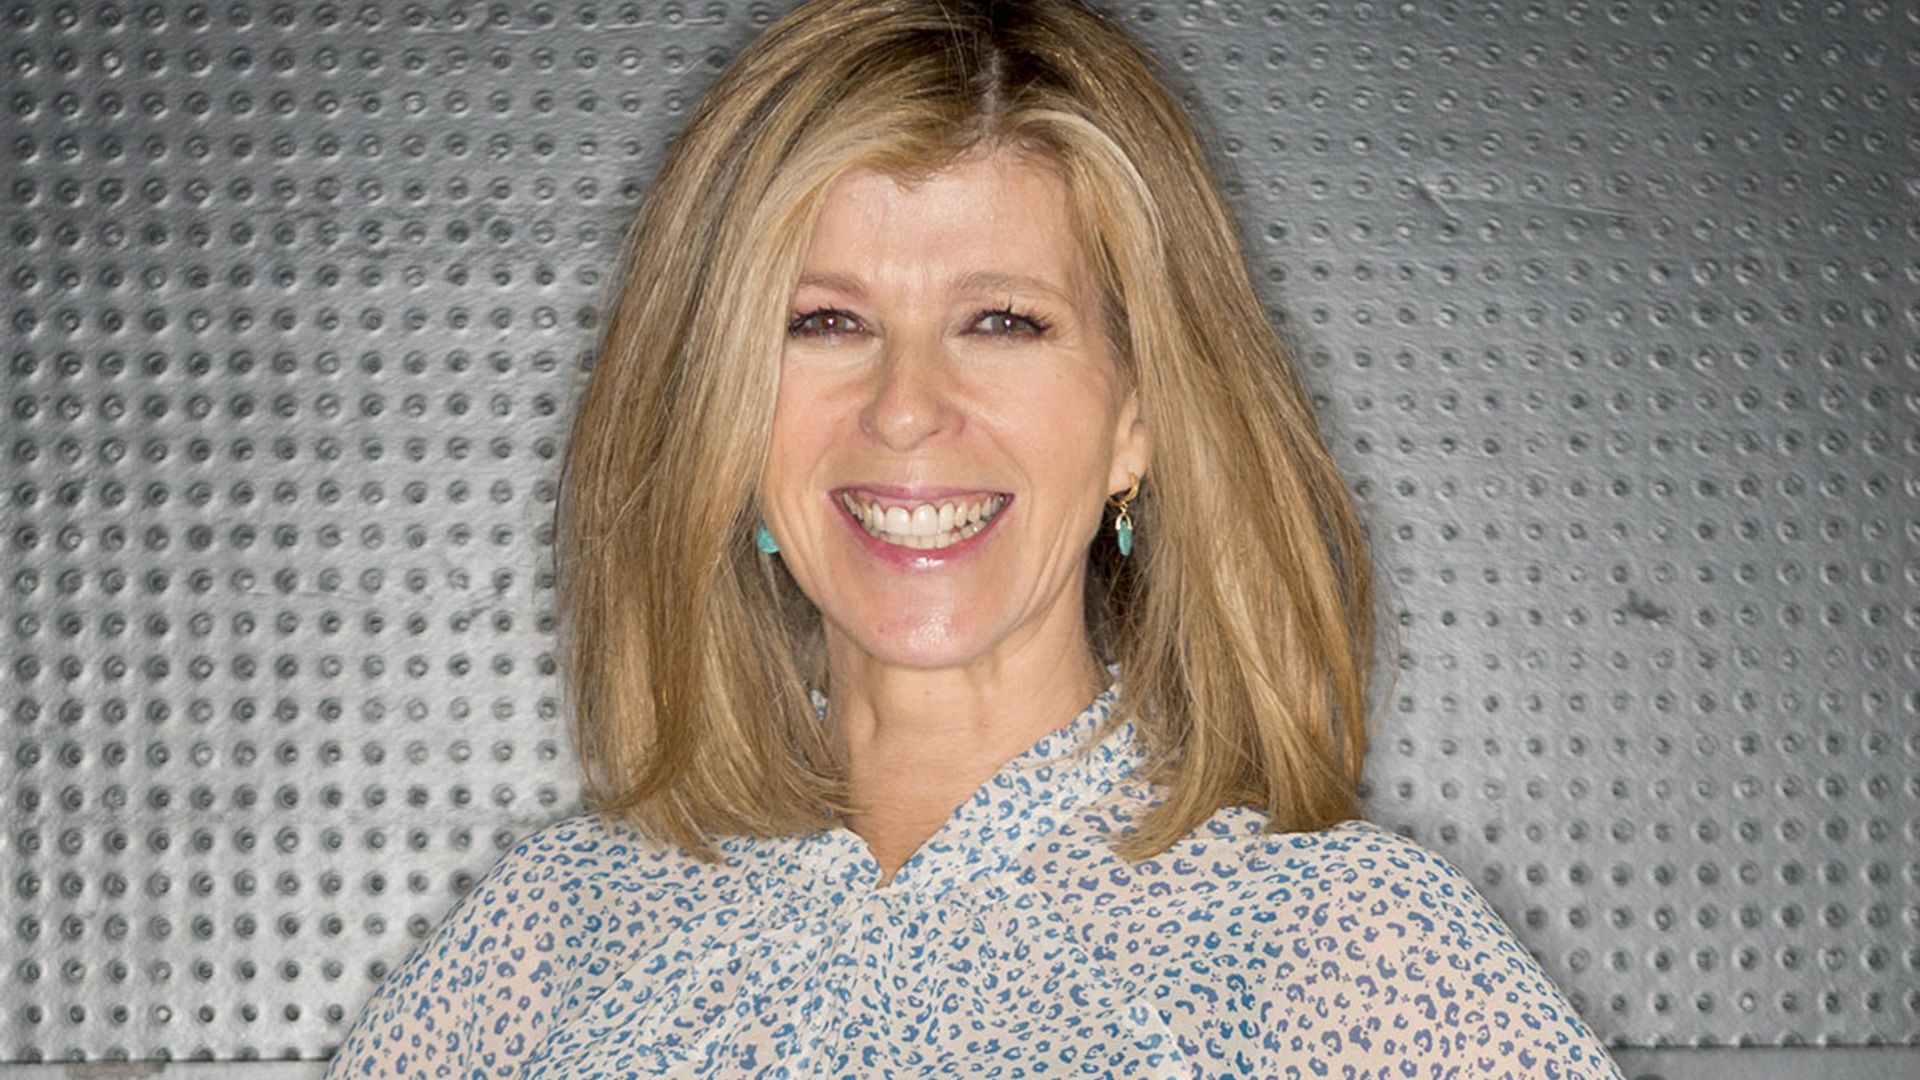 Kate Garraway floors fans in fitted pencil skirt and sheer blouse